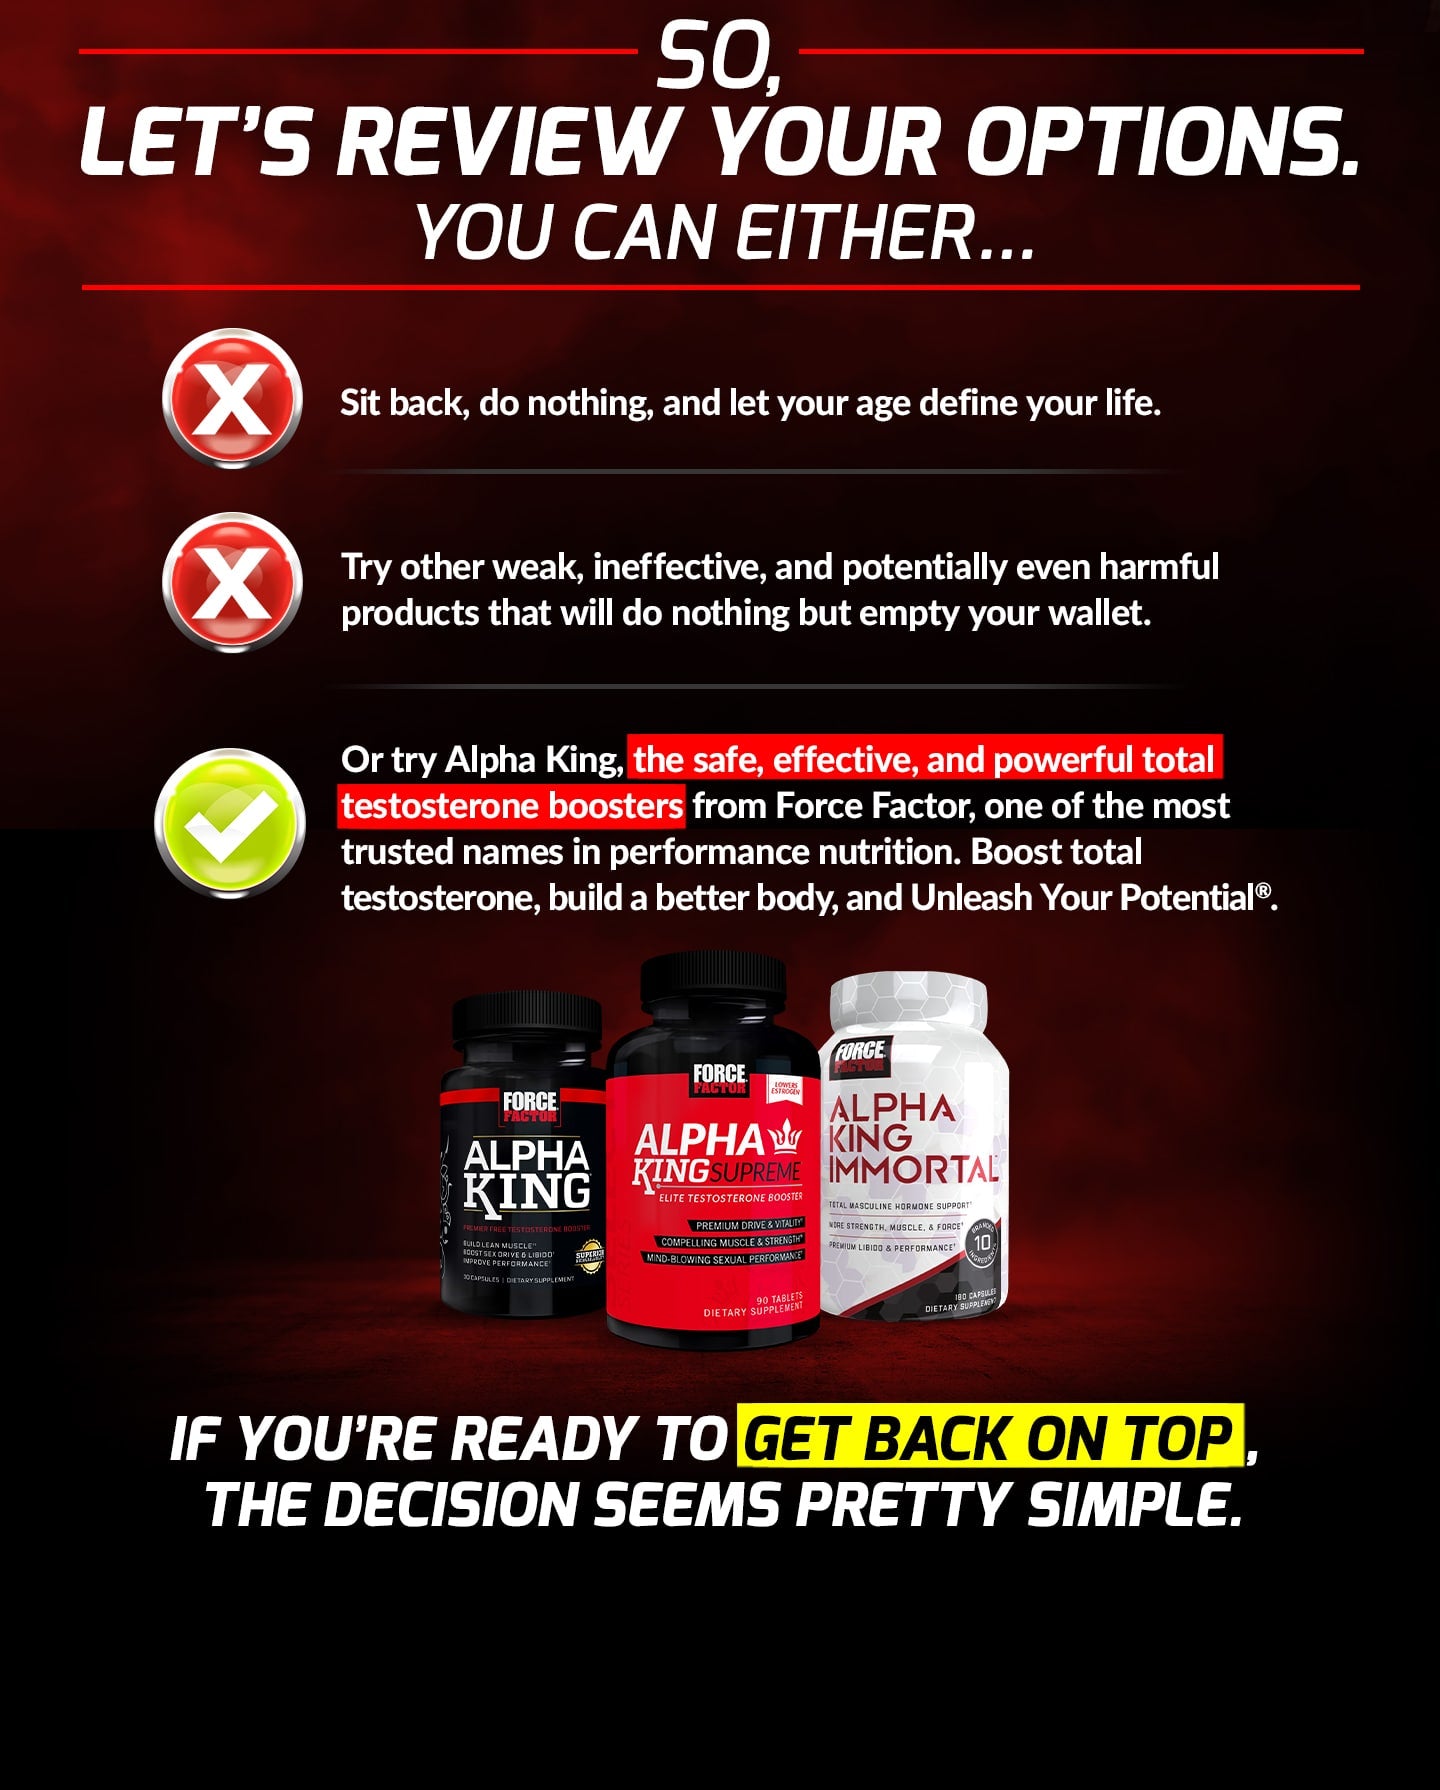 SO, LET’S REVIEW YOUR OPTIONS. YOU CAN EITHER... Sit back, do nothing, and let your age define your life. Try other weak, ineffective, and potentially even harmful products that will do nothing but empty your wallet. Or try Alpha King, the safe, effective, and powerful total testosterone boosters from Force Factor, one of the most trusted names in performance nutrition. Boost total testosterone, build a better body, and Unleash Your Potential®. IF YOU’RE READY TO GET BACK ON TOP, THE DECISION SEEMS PRETTY SIMPLE.